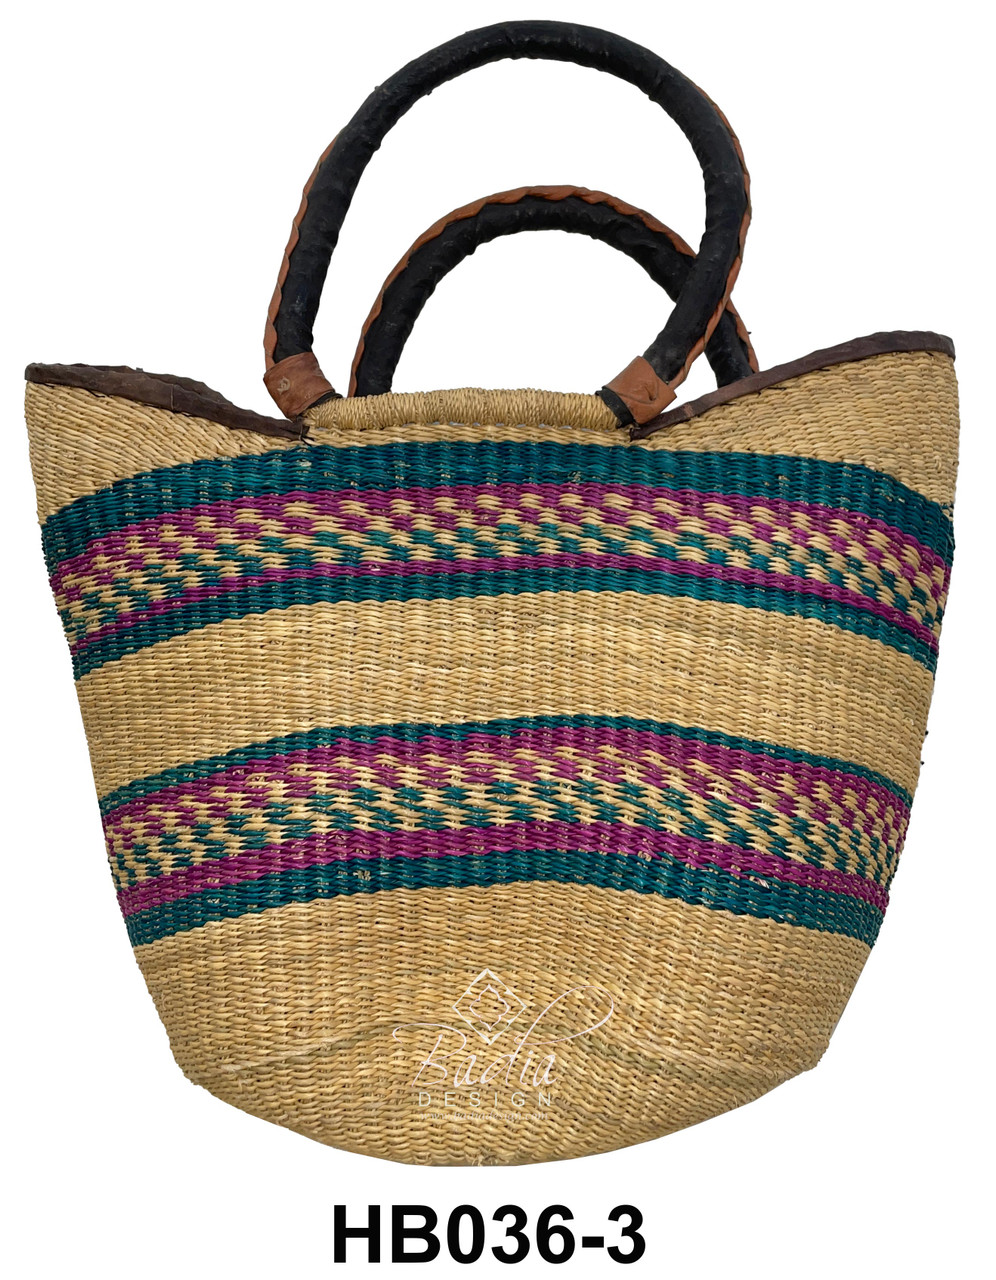 Colorful African Straw Handbags - HB036